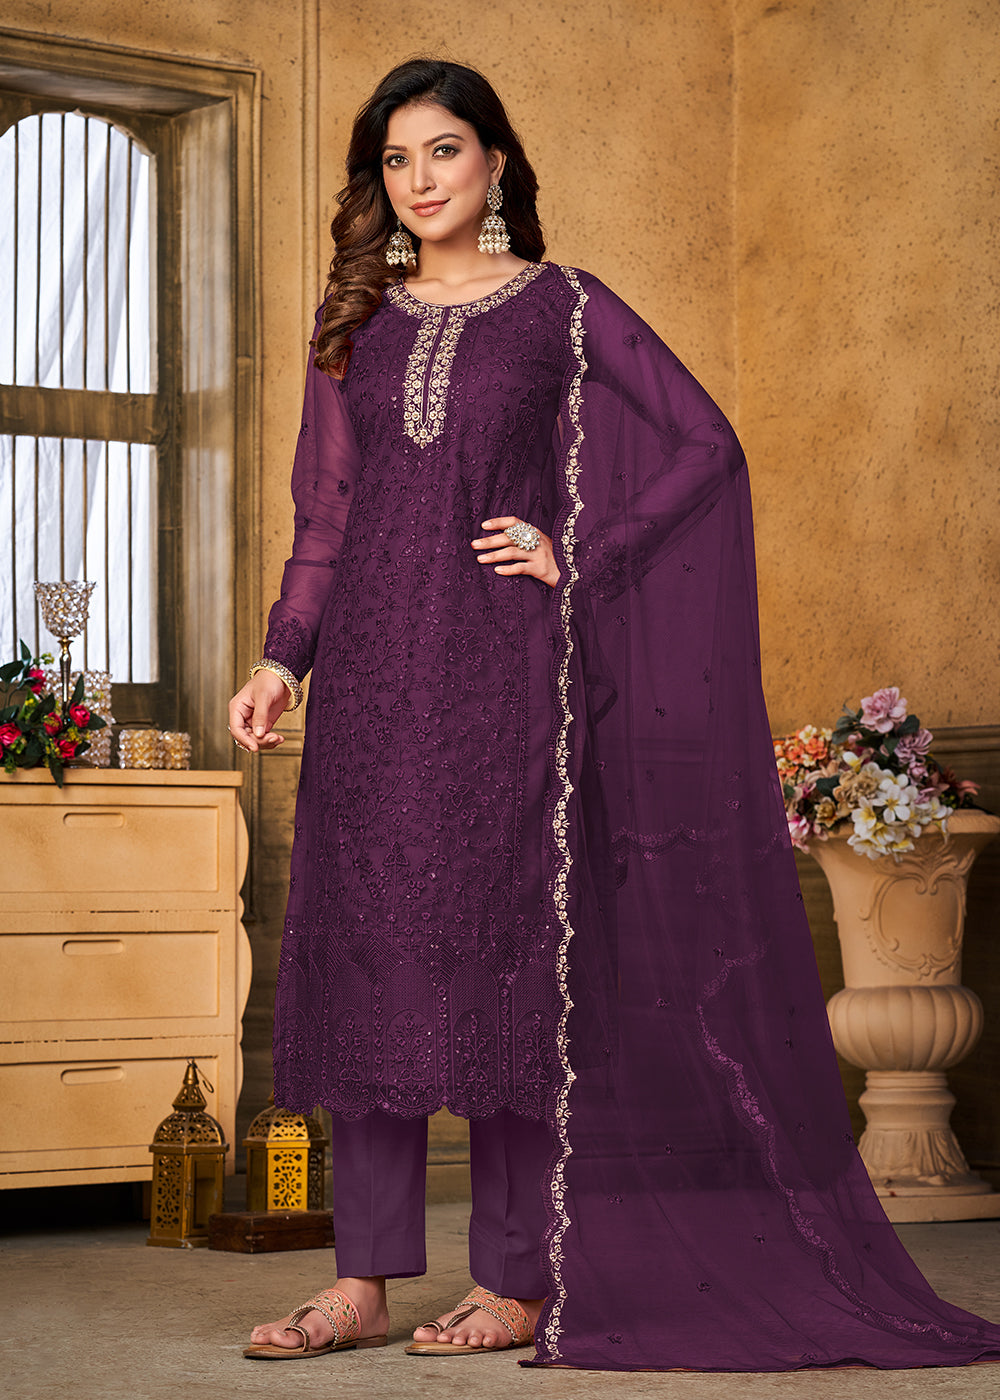 Buy Now Festive Party Blue Net Embroidered Trendy Salwar Suit Online in USA, UK, Canada, Germany, Australia & Worldwide at Empress Clothing.